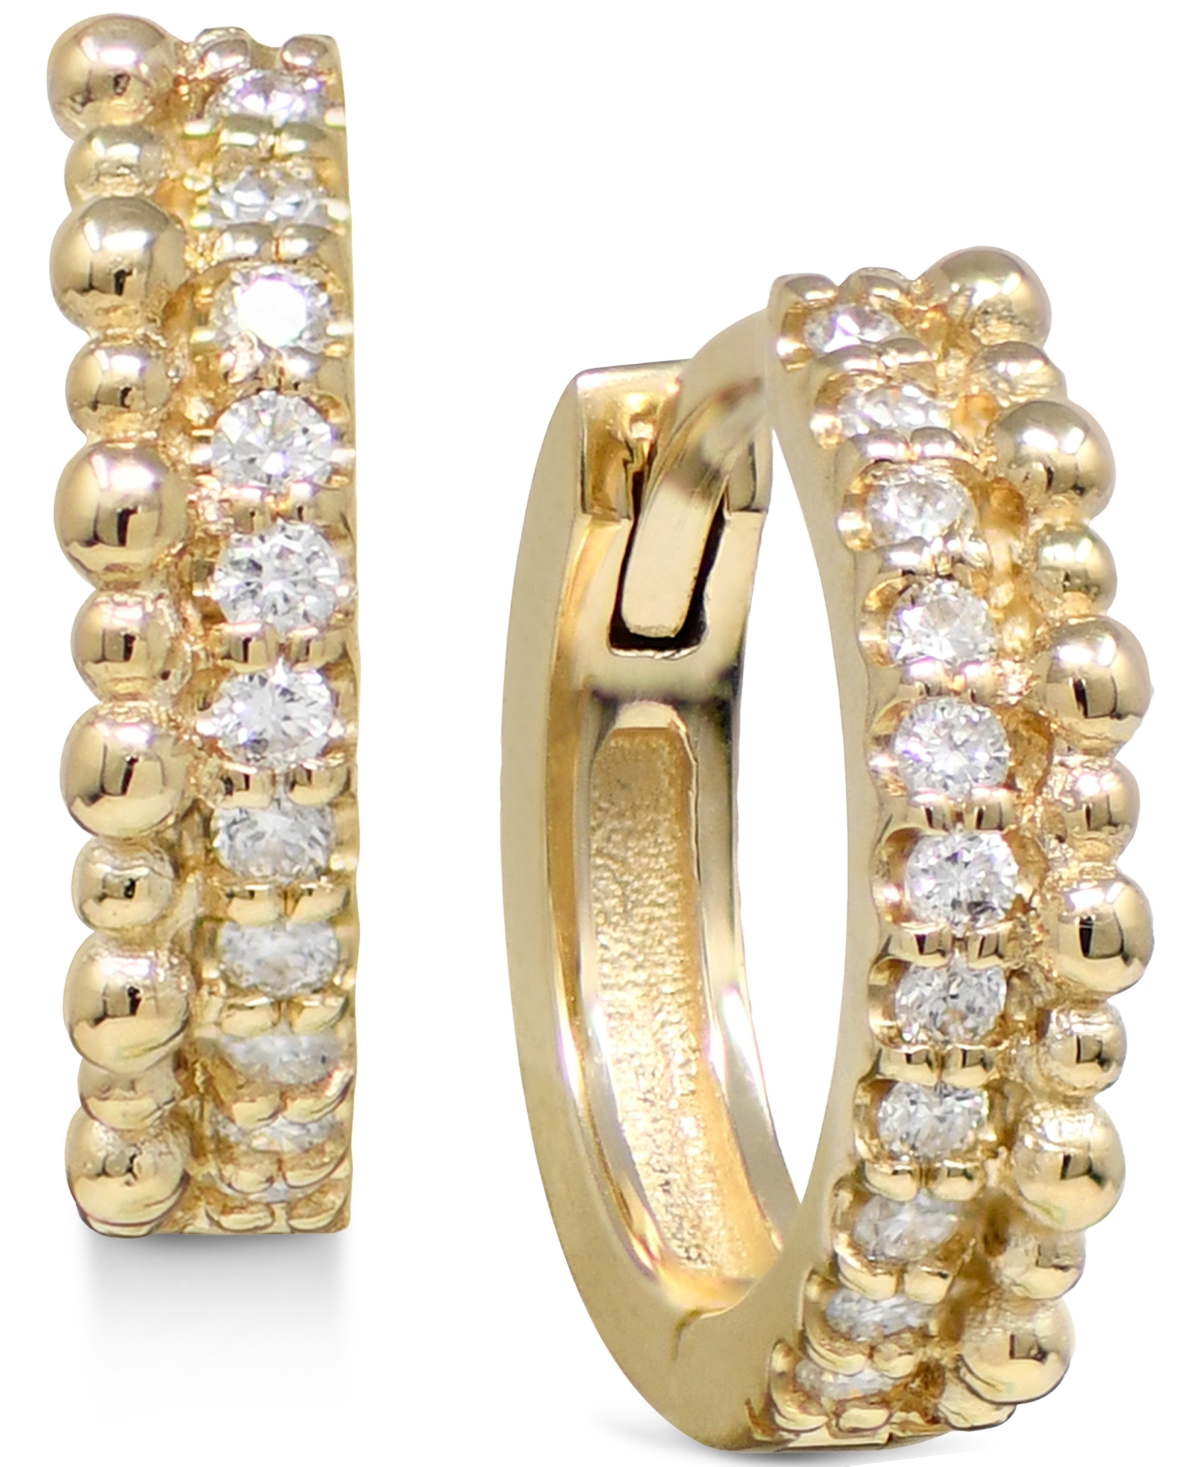 Anzie Diamond Pave & Bead Extra Small Hoop Earrings (1/6 Ct. T.w.) In 14k Gold, 0.47"